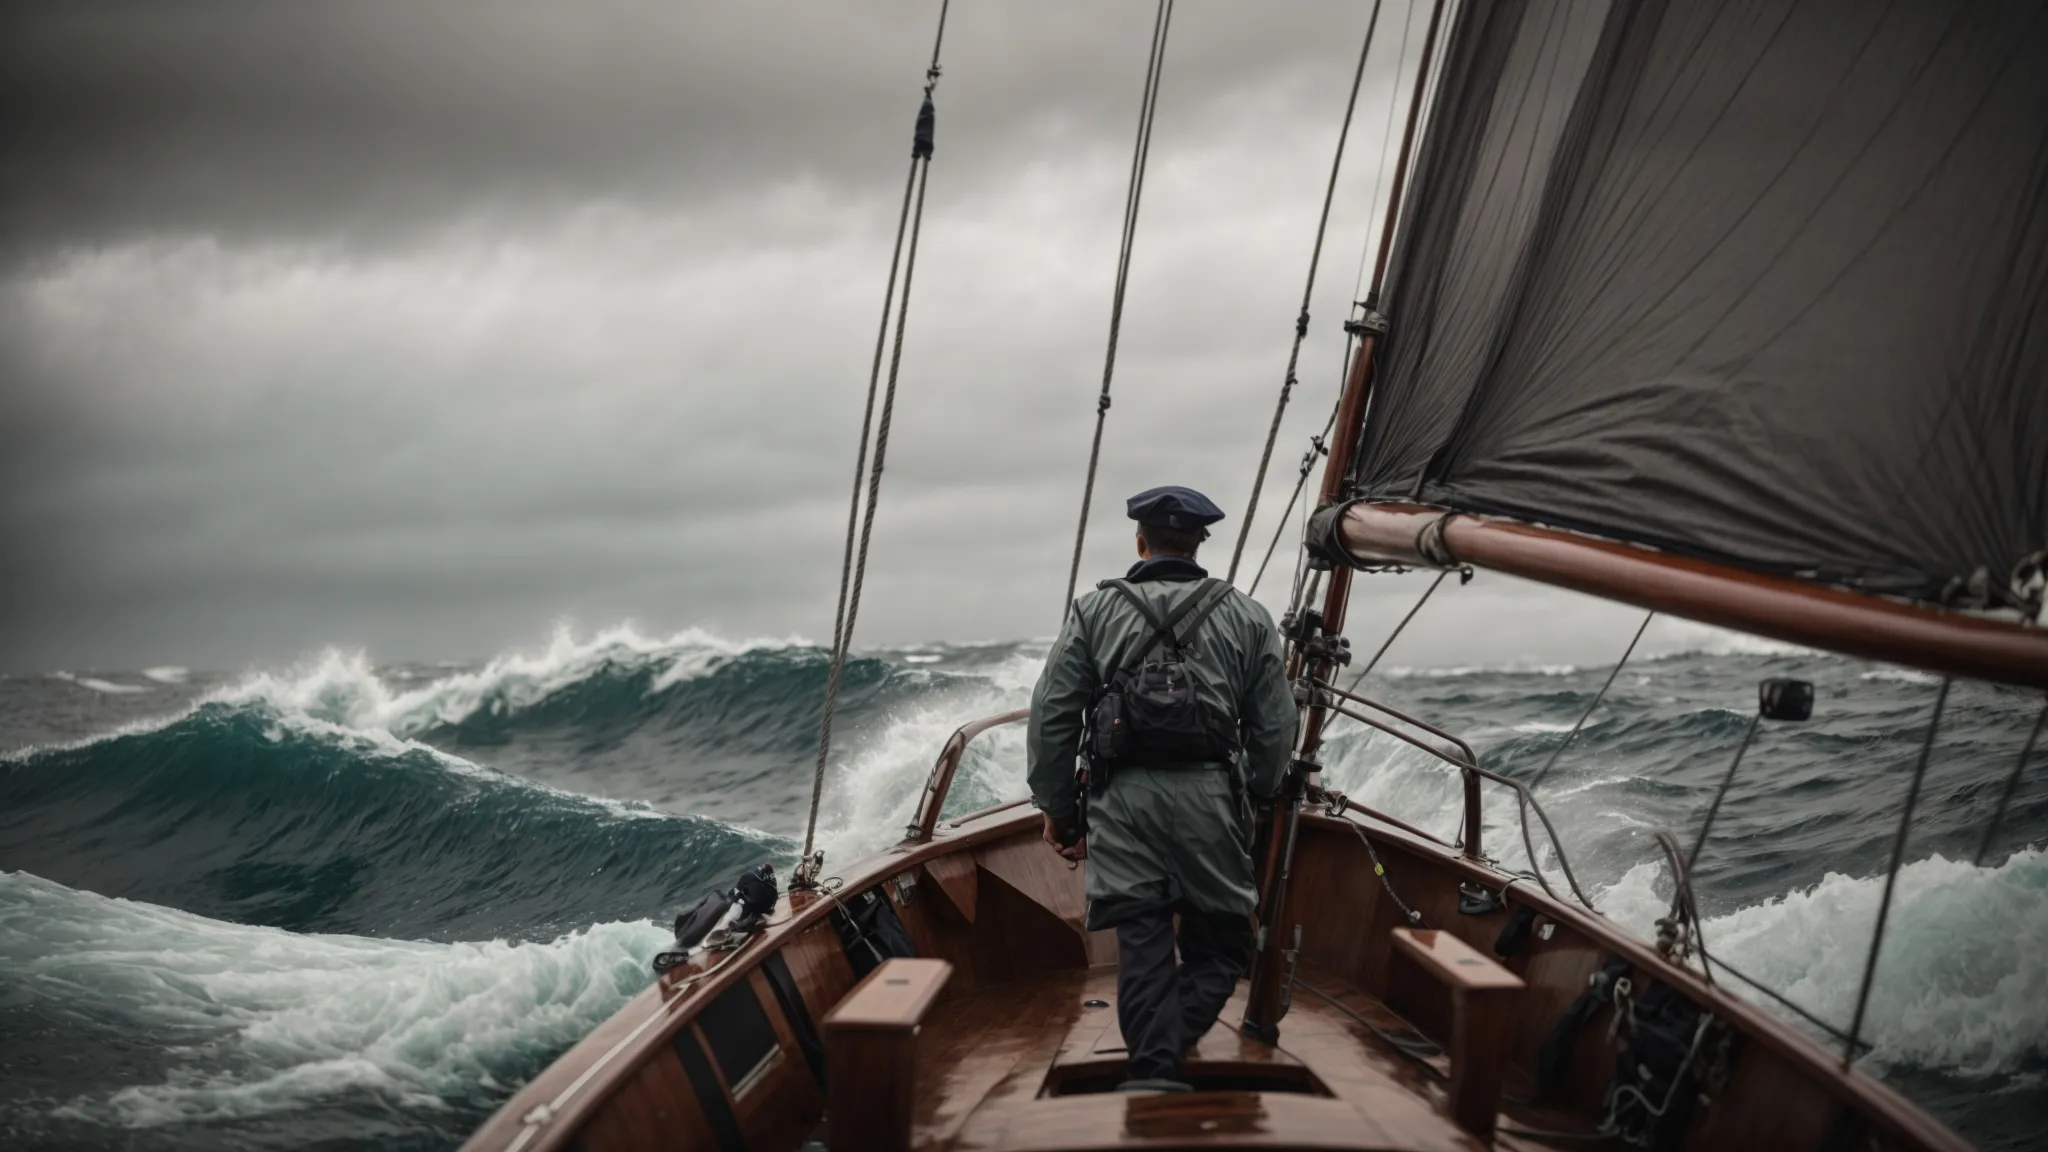 a solitary sailor skillfully navigates a tumultuous sea, embodying the art of turning challenges into triumphs.